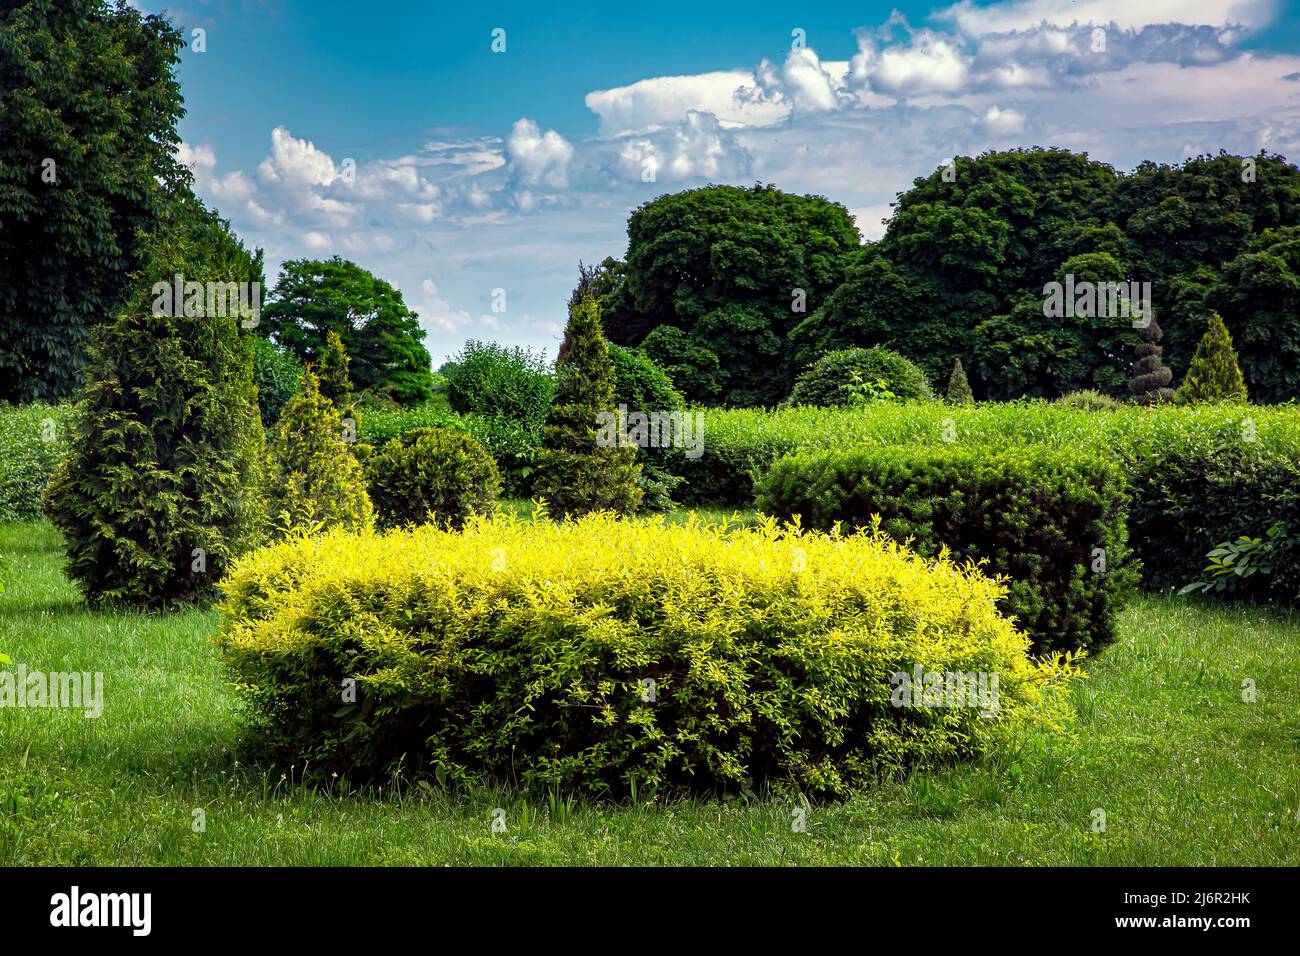 clipped bushes in topiary different shape in the background deciduous trees illuminated by sunlight, nature summer landscape in park, white clouds on Stock Photo